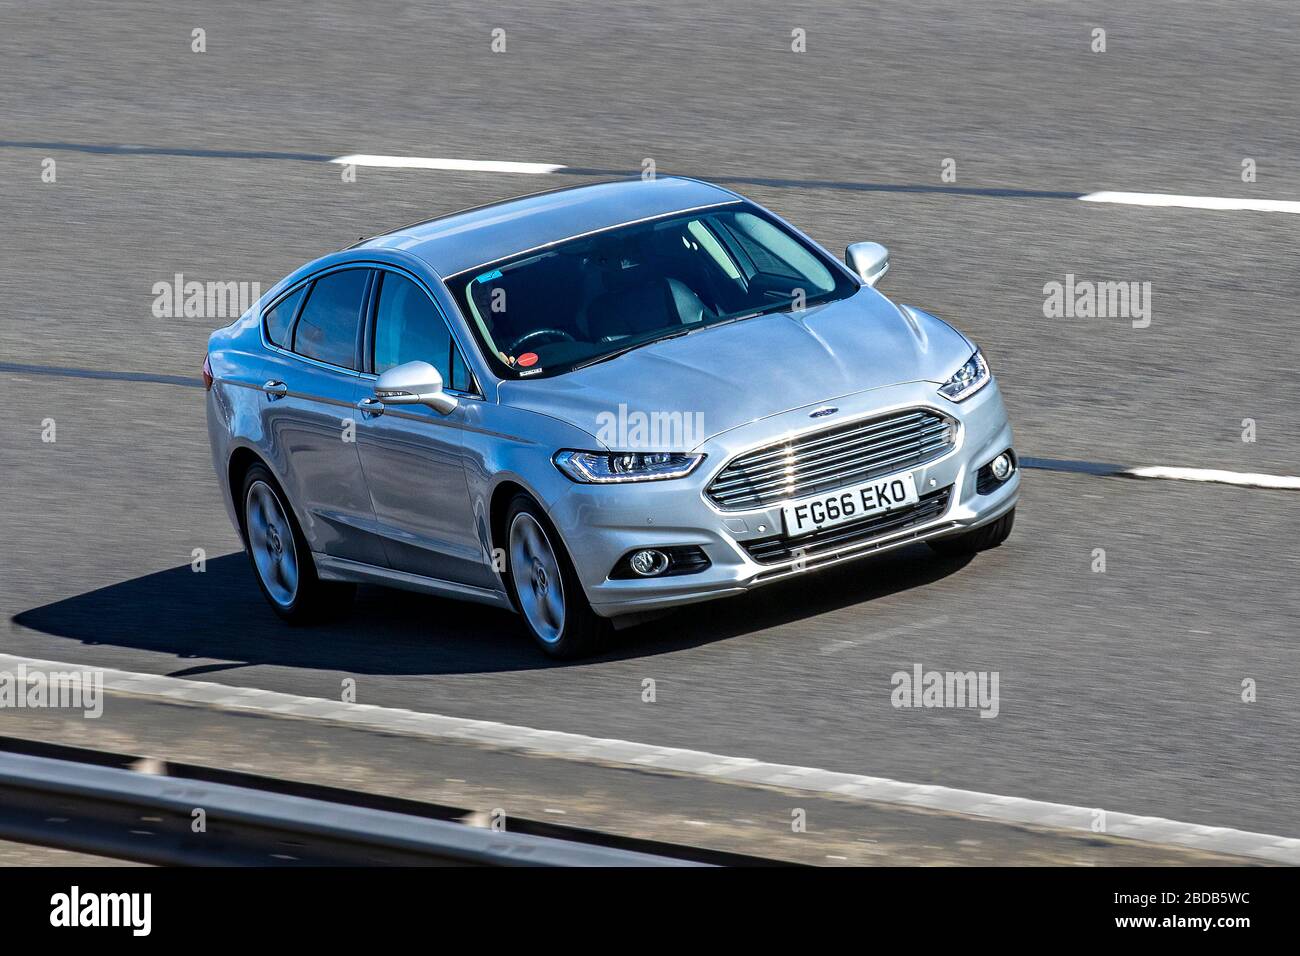 2016 silver Ford Mondeo Titanium TDCI; Vehicular traffic moving vehicles, driving vehicle on UK roads, motors, motoring on the M6 motorway highway Stock Photo